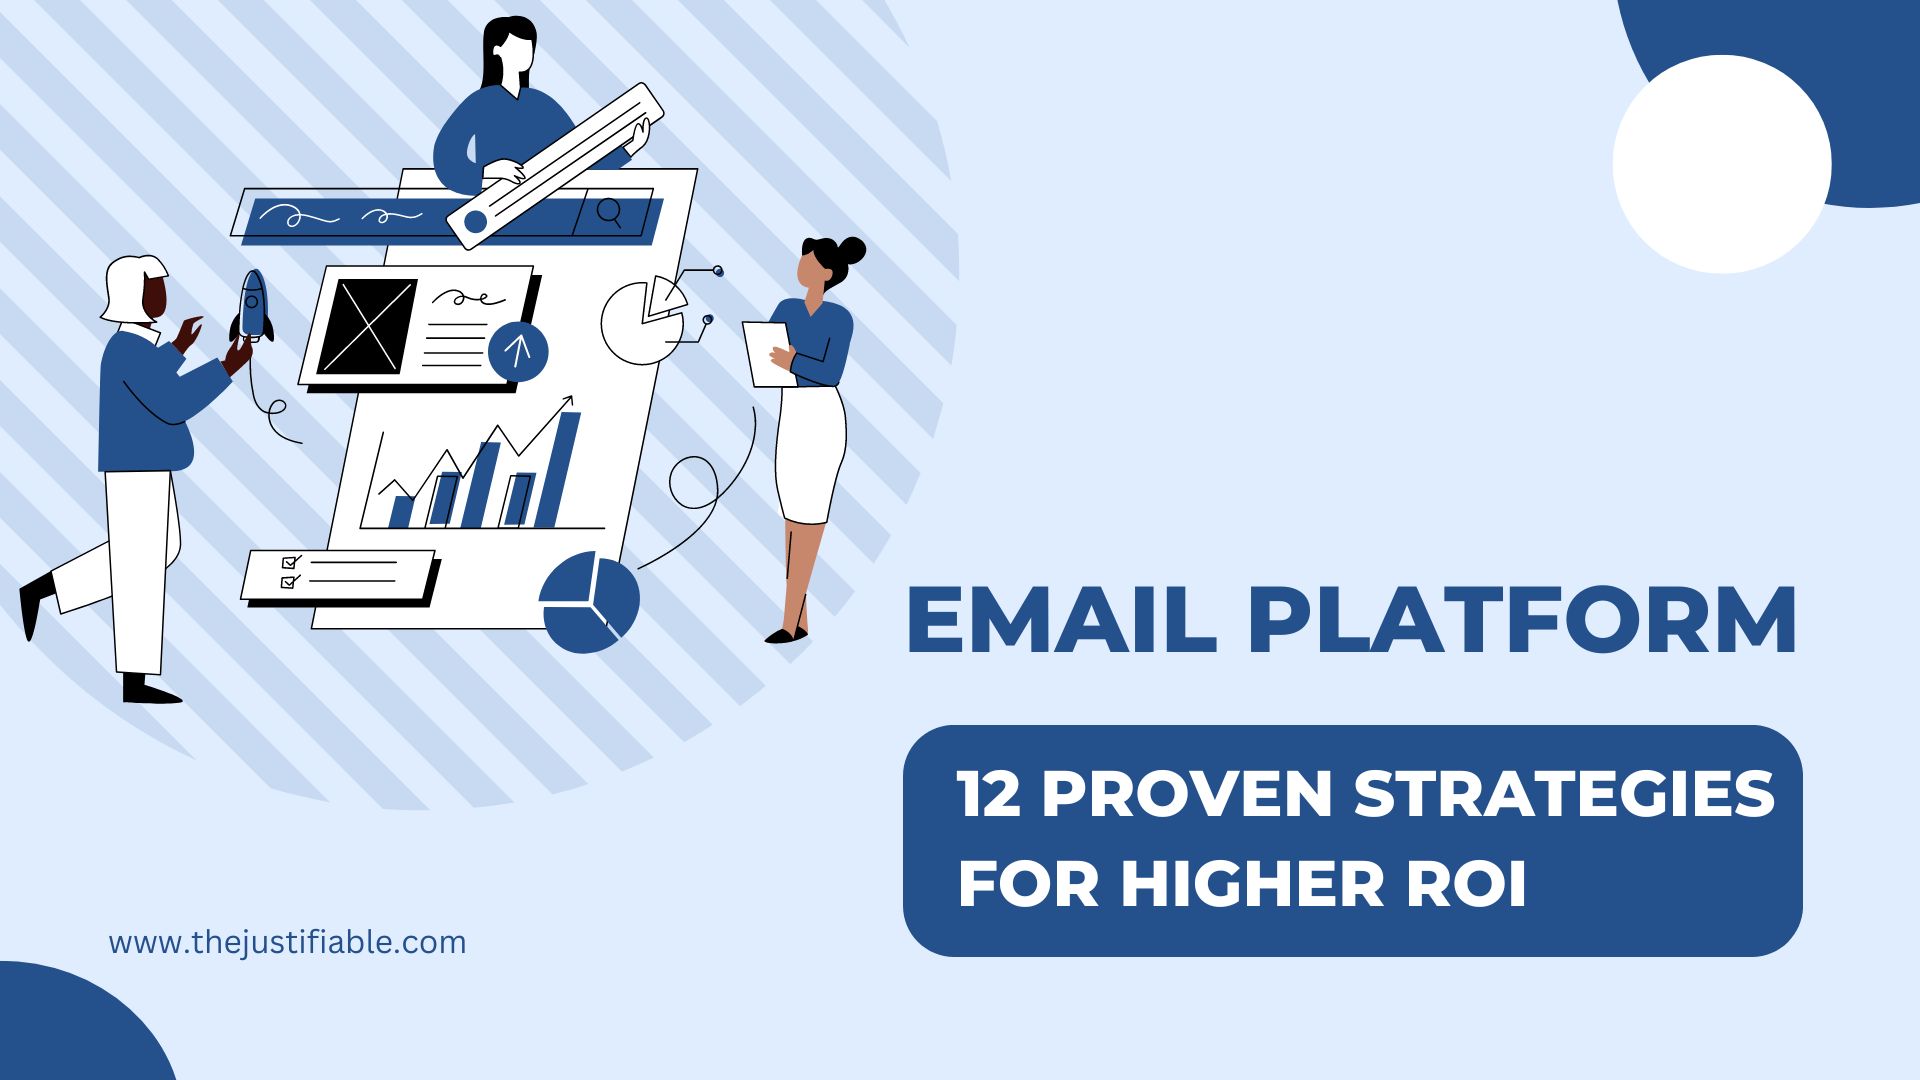 The image is a graphic related to email platform.